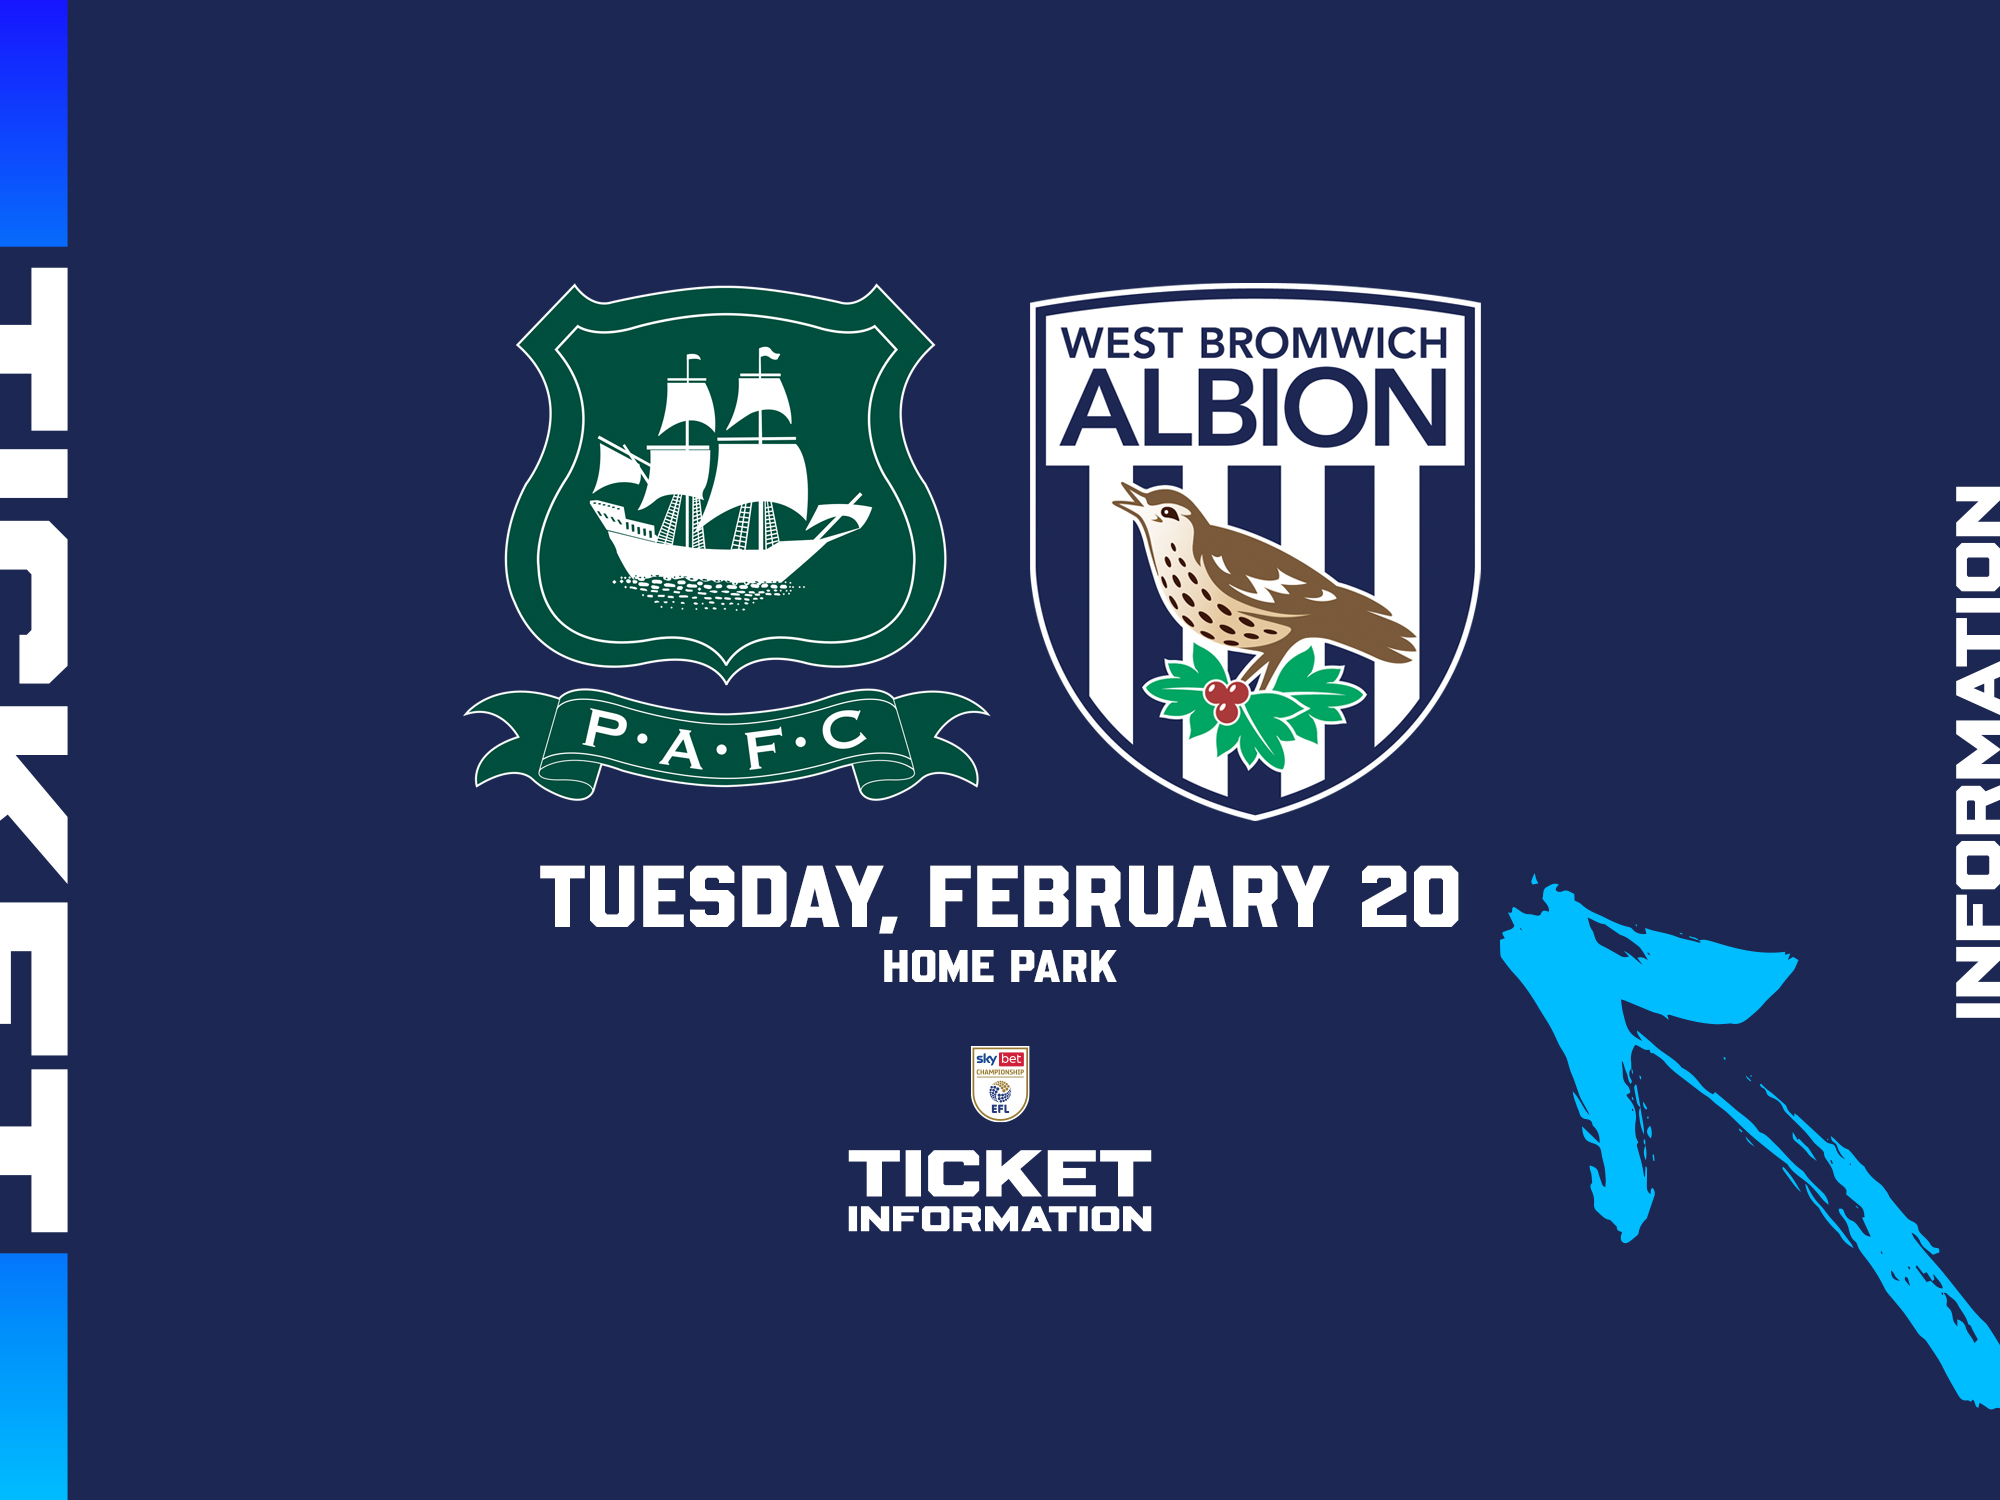 A ticket graphic displaying information for Albion's game at Plymouth